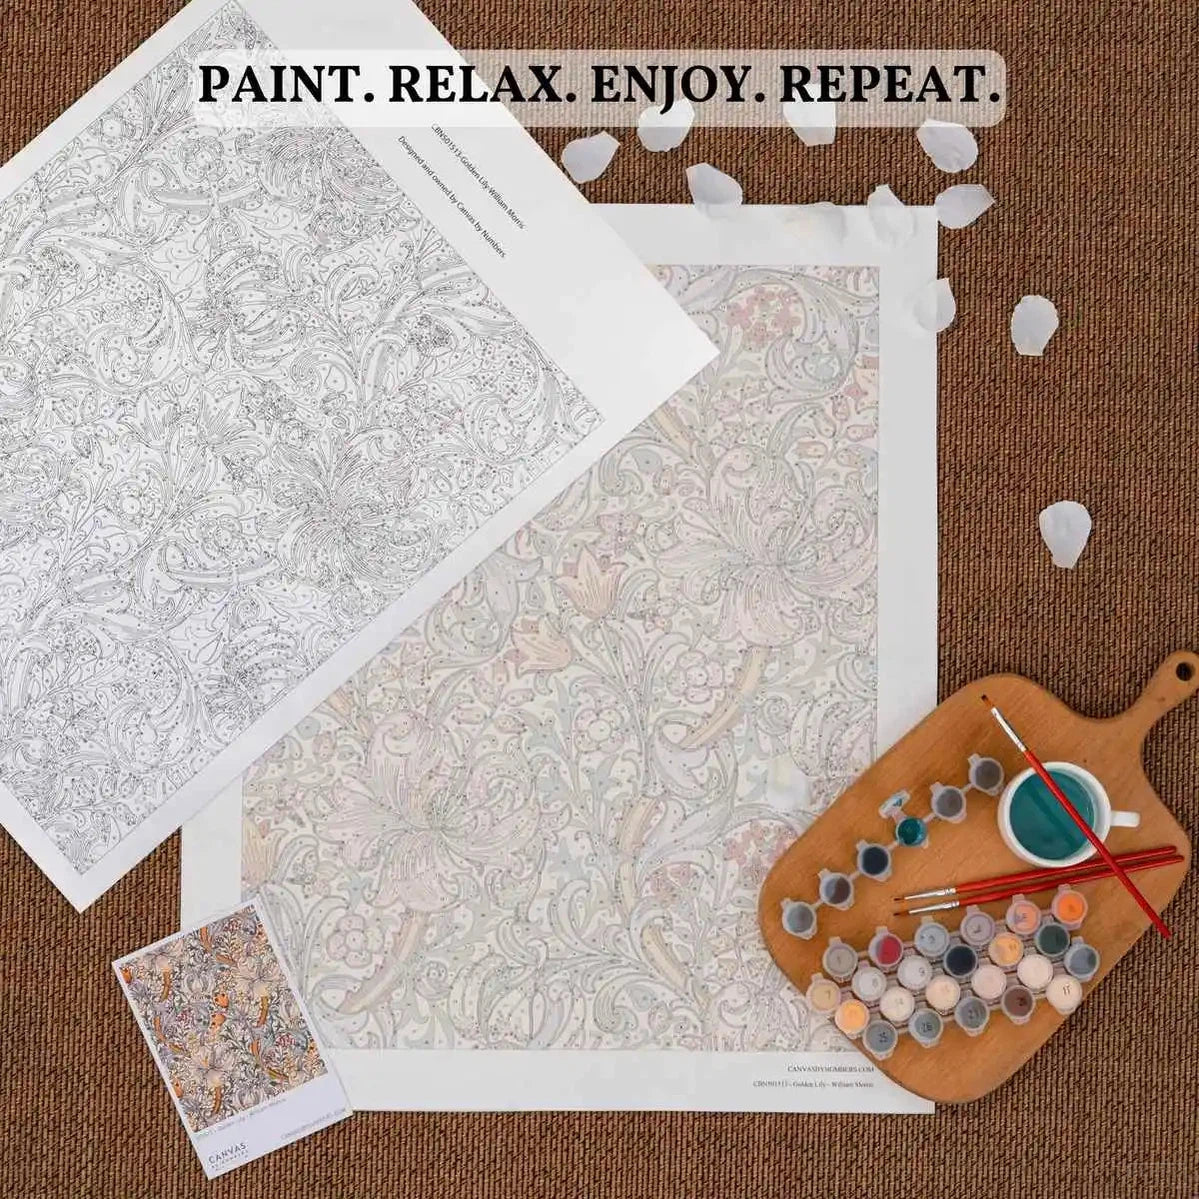 Fruit - Paint by Numbers-A fun & colorful paint by numbers by master Mucha. Enjoy this art-nouveau portrait! Shop quality kits rated excellent in Trustpilot at CBN.-Canvas by Numbers